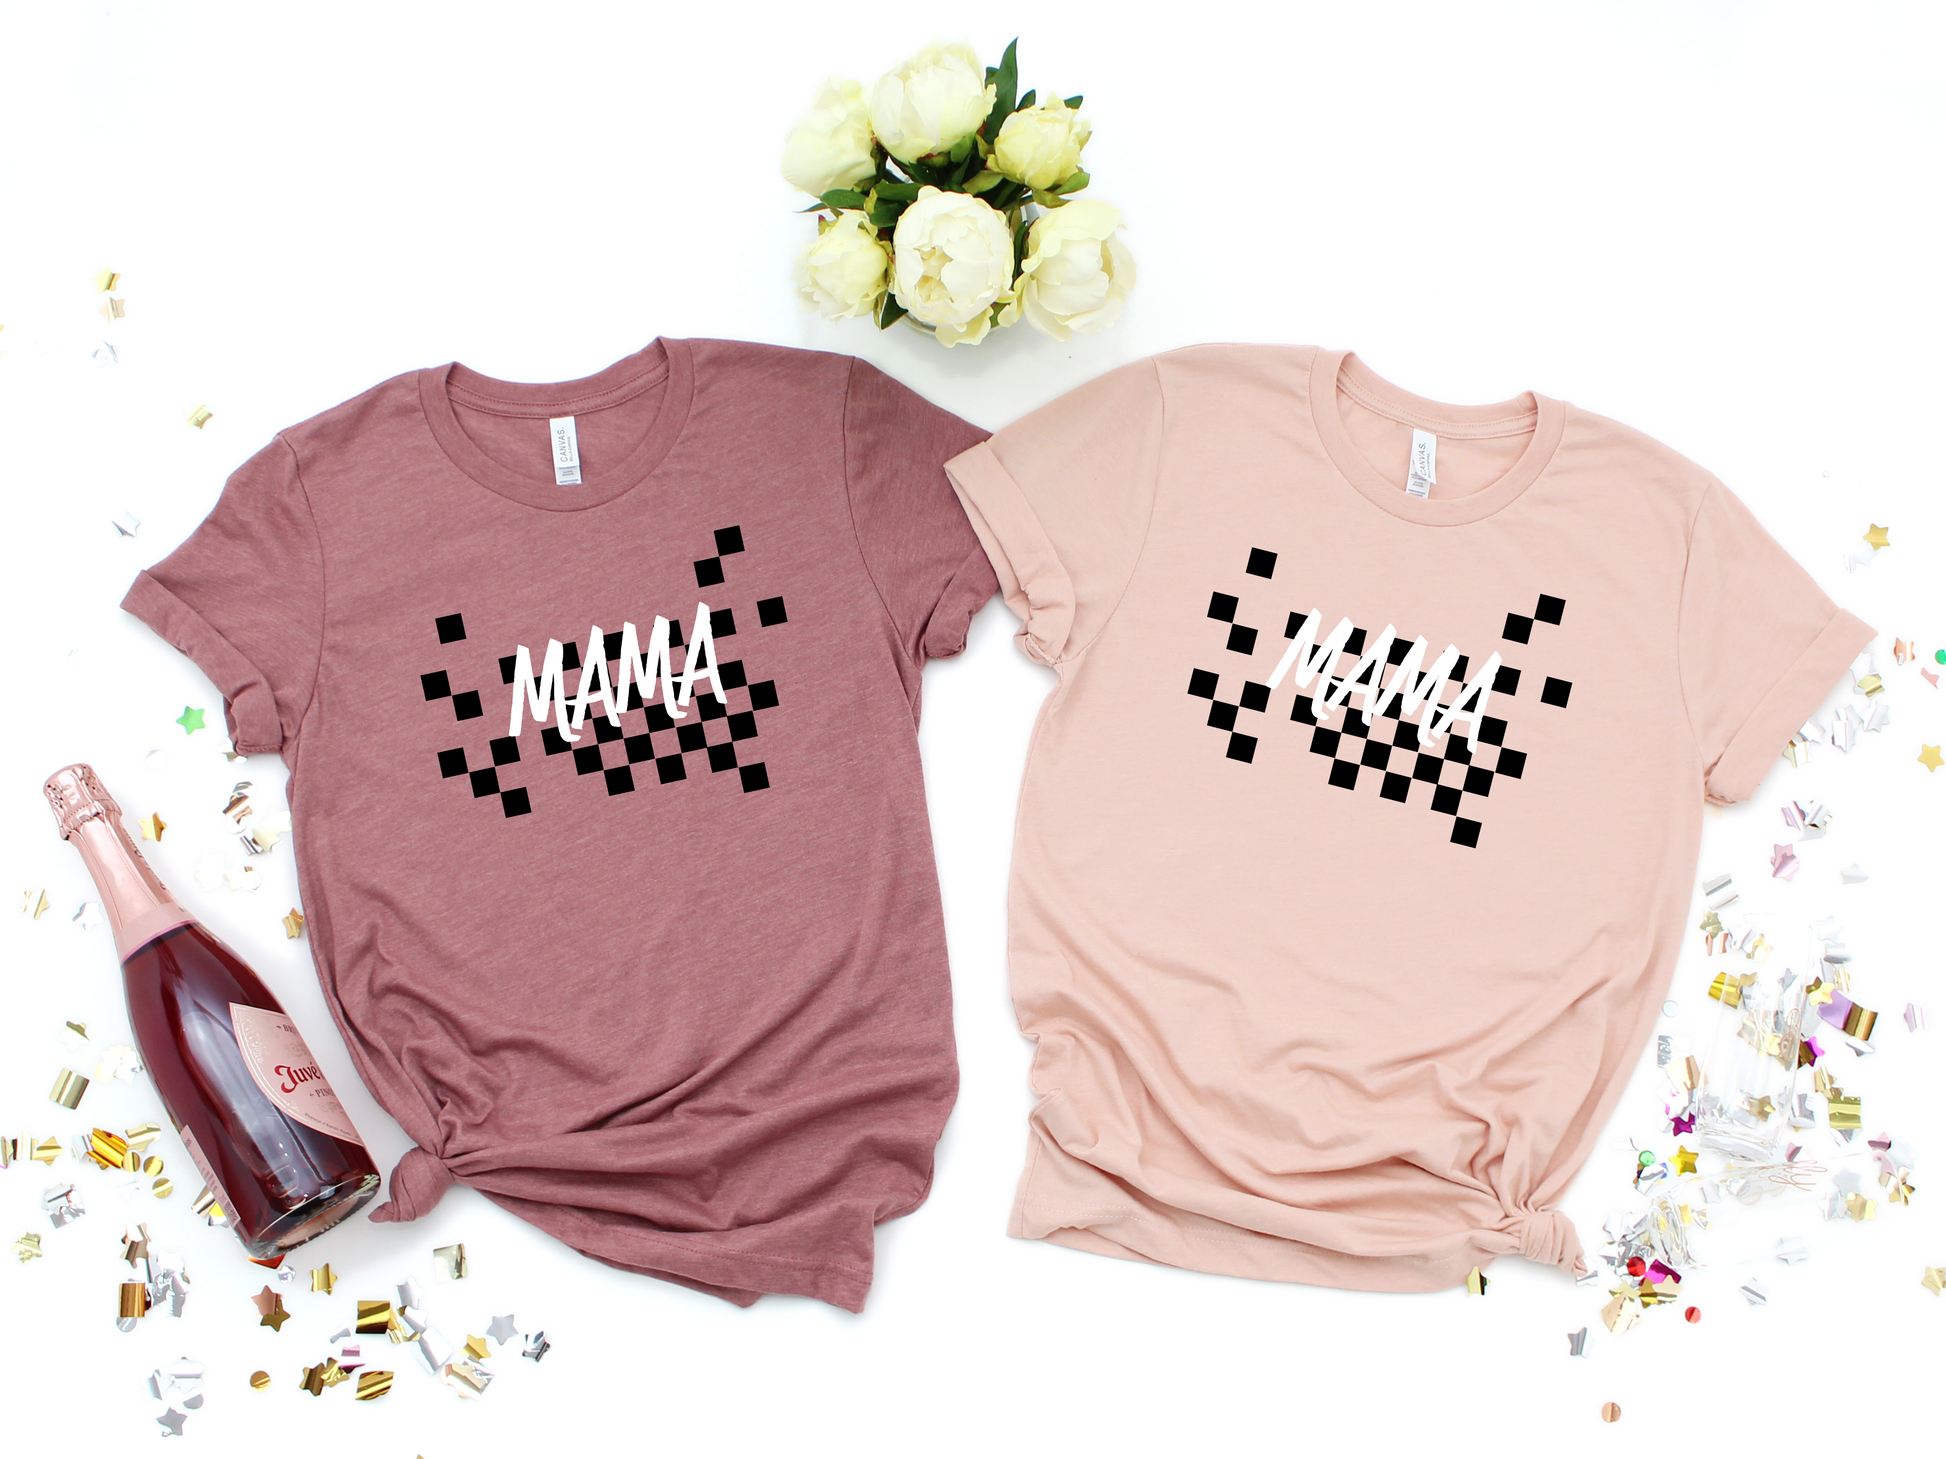 Stylish t-shirt: 'Checkered Mama' - a fun and fashionable design for moms.